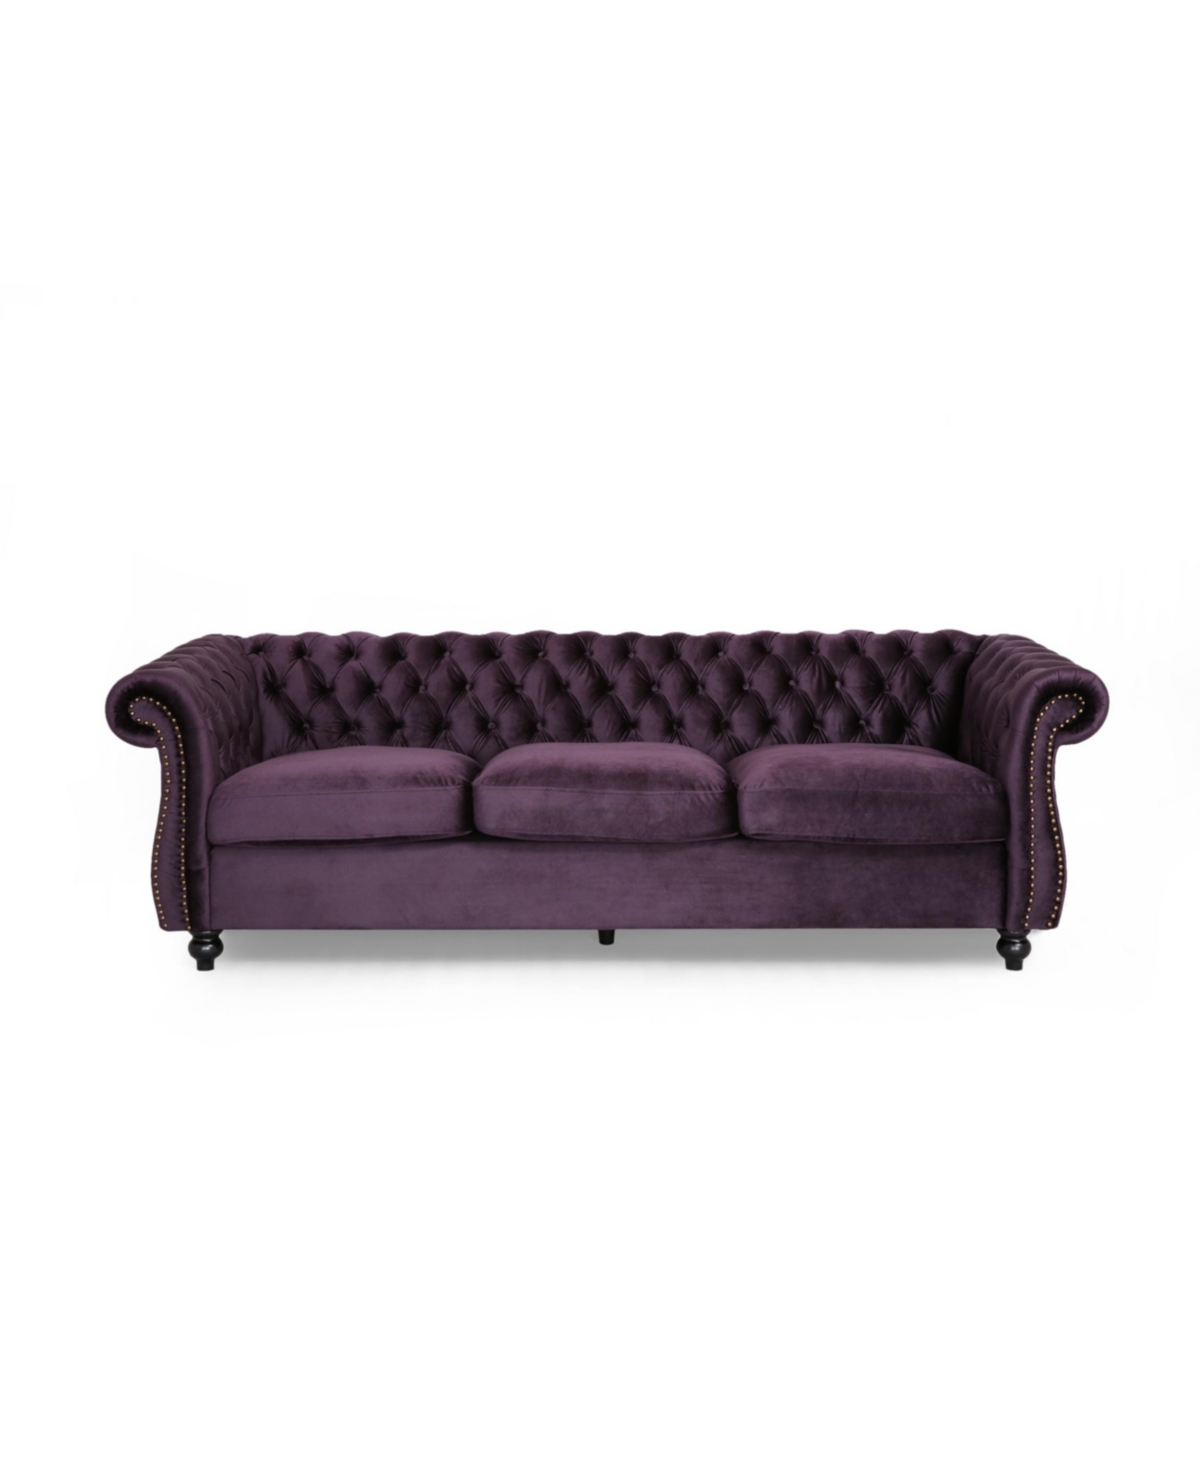 Noble House Somerville Chesterfield Tufted Jewel Toned Sofa With Scroll Arms In Blackberry